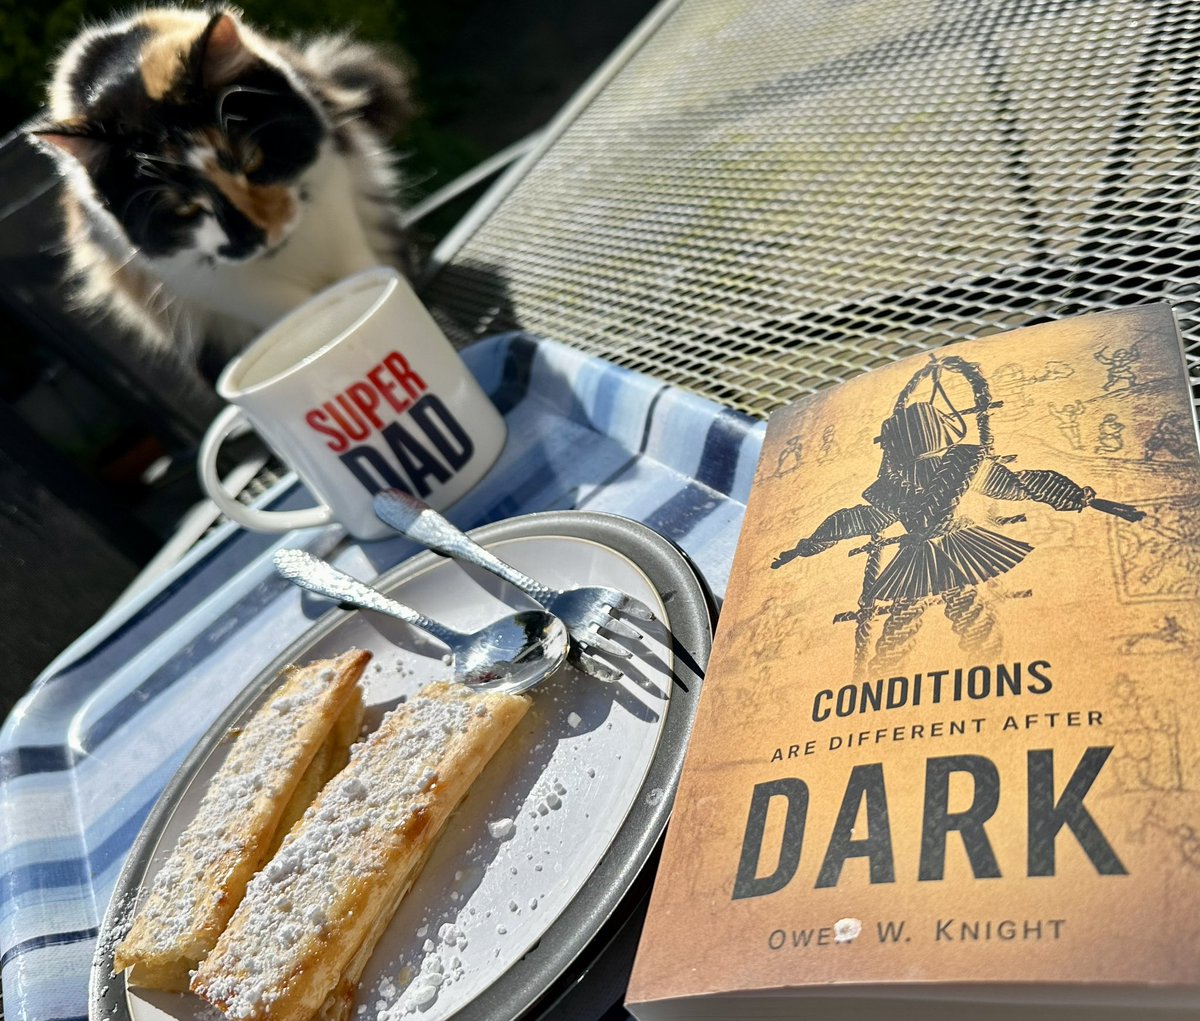 Am much enjoying a lazy Sunday with home made # gluten free banana strudels, good coffee, sunshine, a curious kitty and a great book from @OwenKnightUK - review soon!